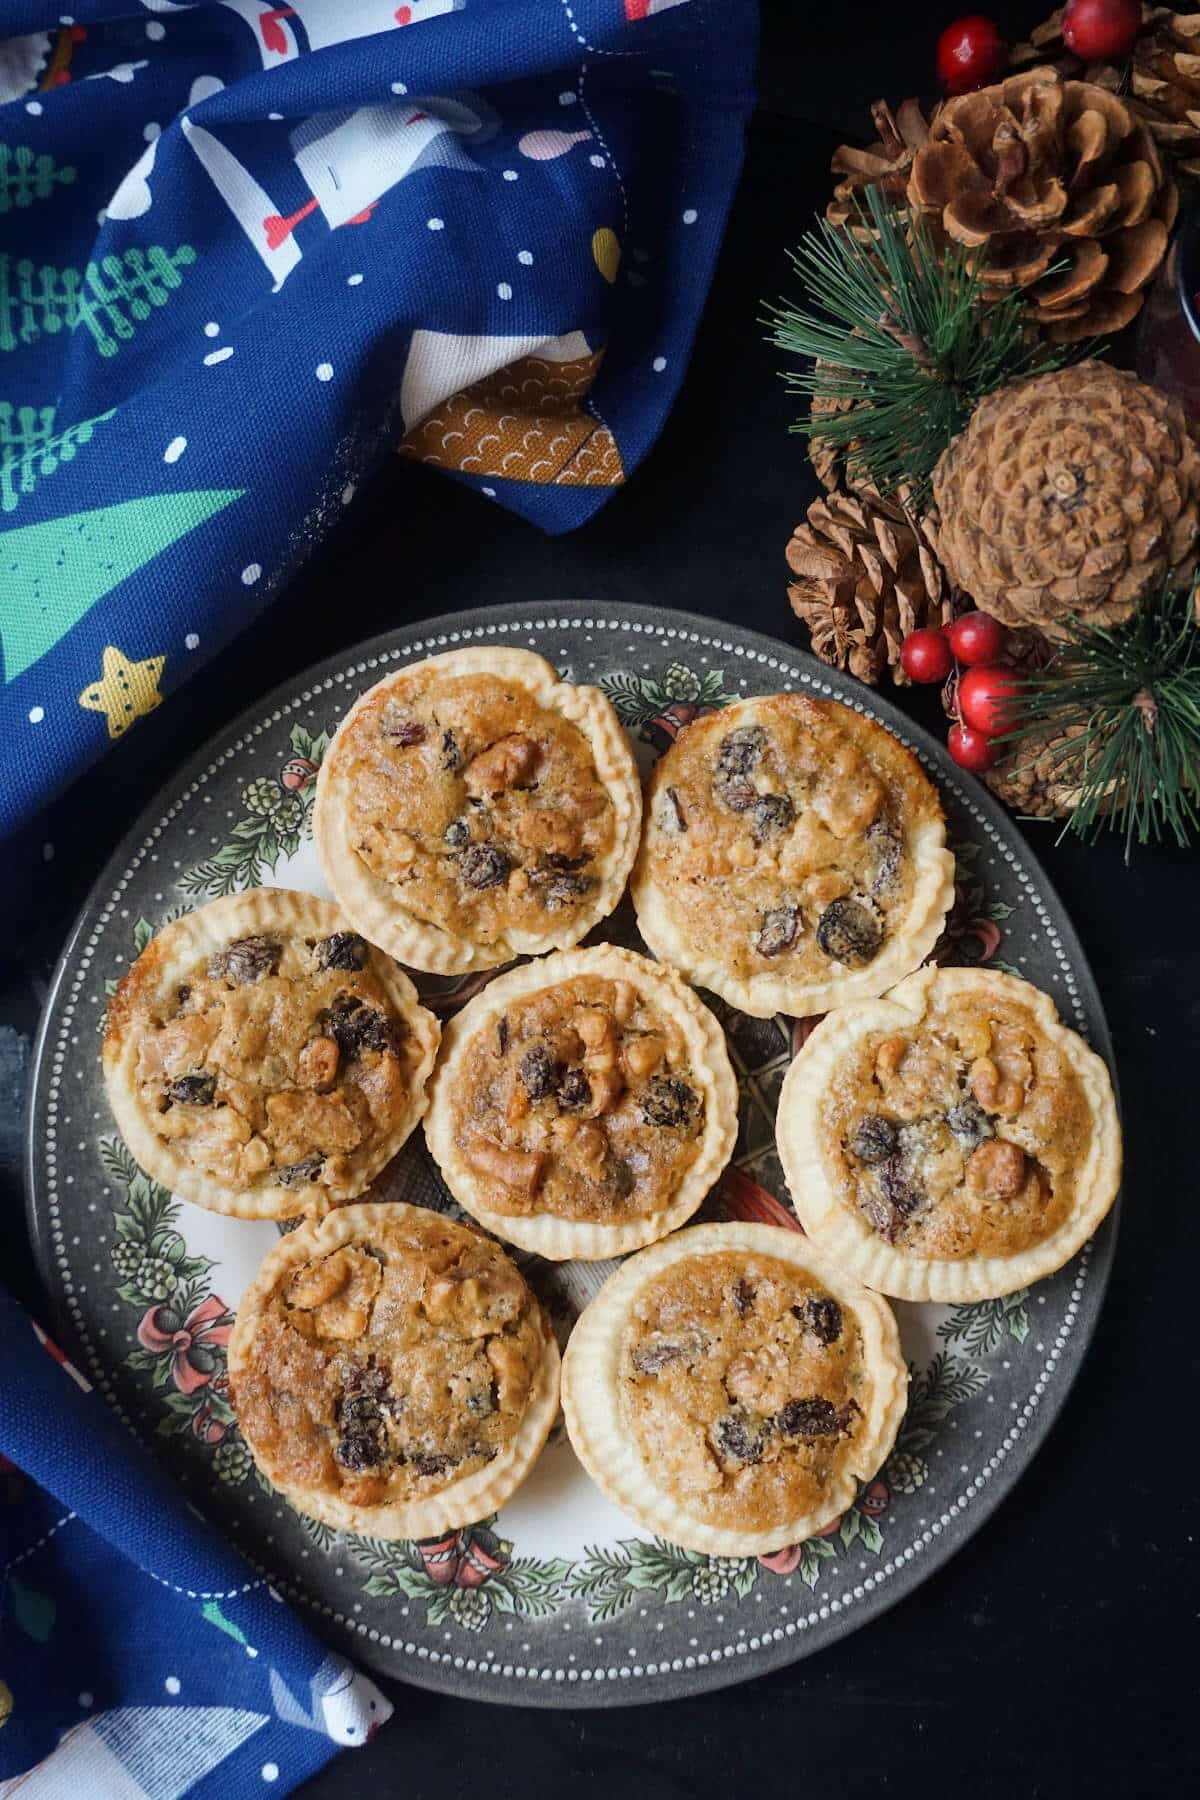 A plate with 7 mini tarts with Christmas decorations around.